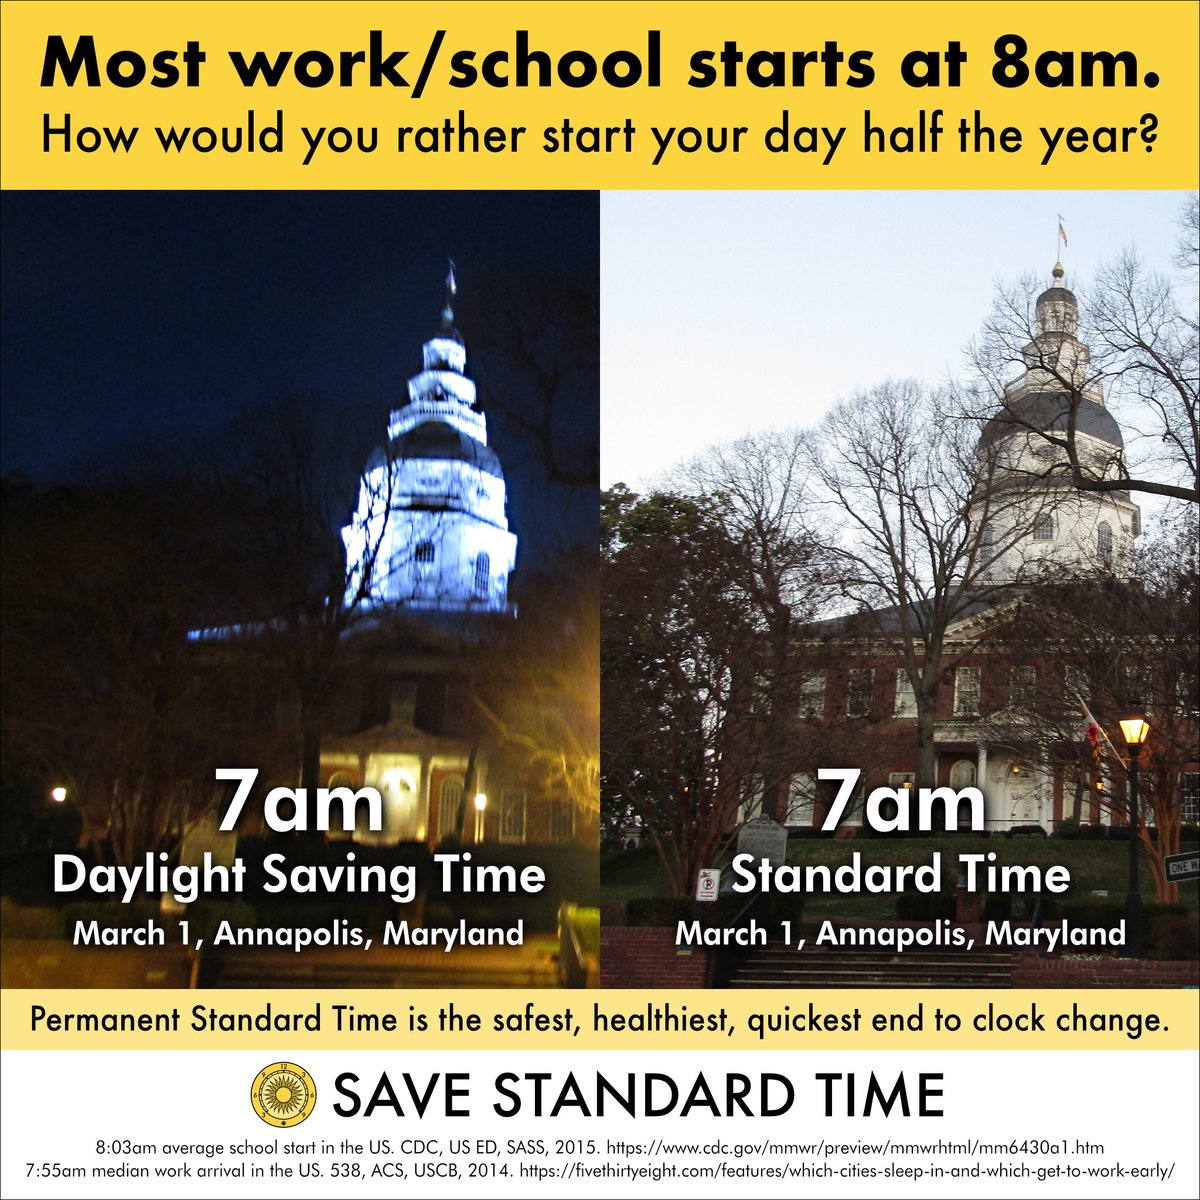 @BC4MD @JPenaMelnyk @DelArianaKelly HB-165 permanent DST would delay Maryland sunrise past 8am for over 3 months. It cost lives in 1974. @mabe_news, Maryland Sleep Society, Agudath Israel of Maryland, @AmerMedicalAssn, @nscsafety, and dozens more oppose pDST and endorse permanent Standard Time instead. #MDLeg #DST